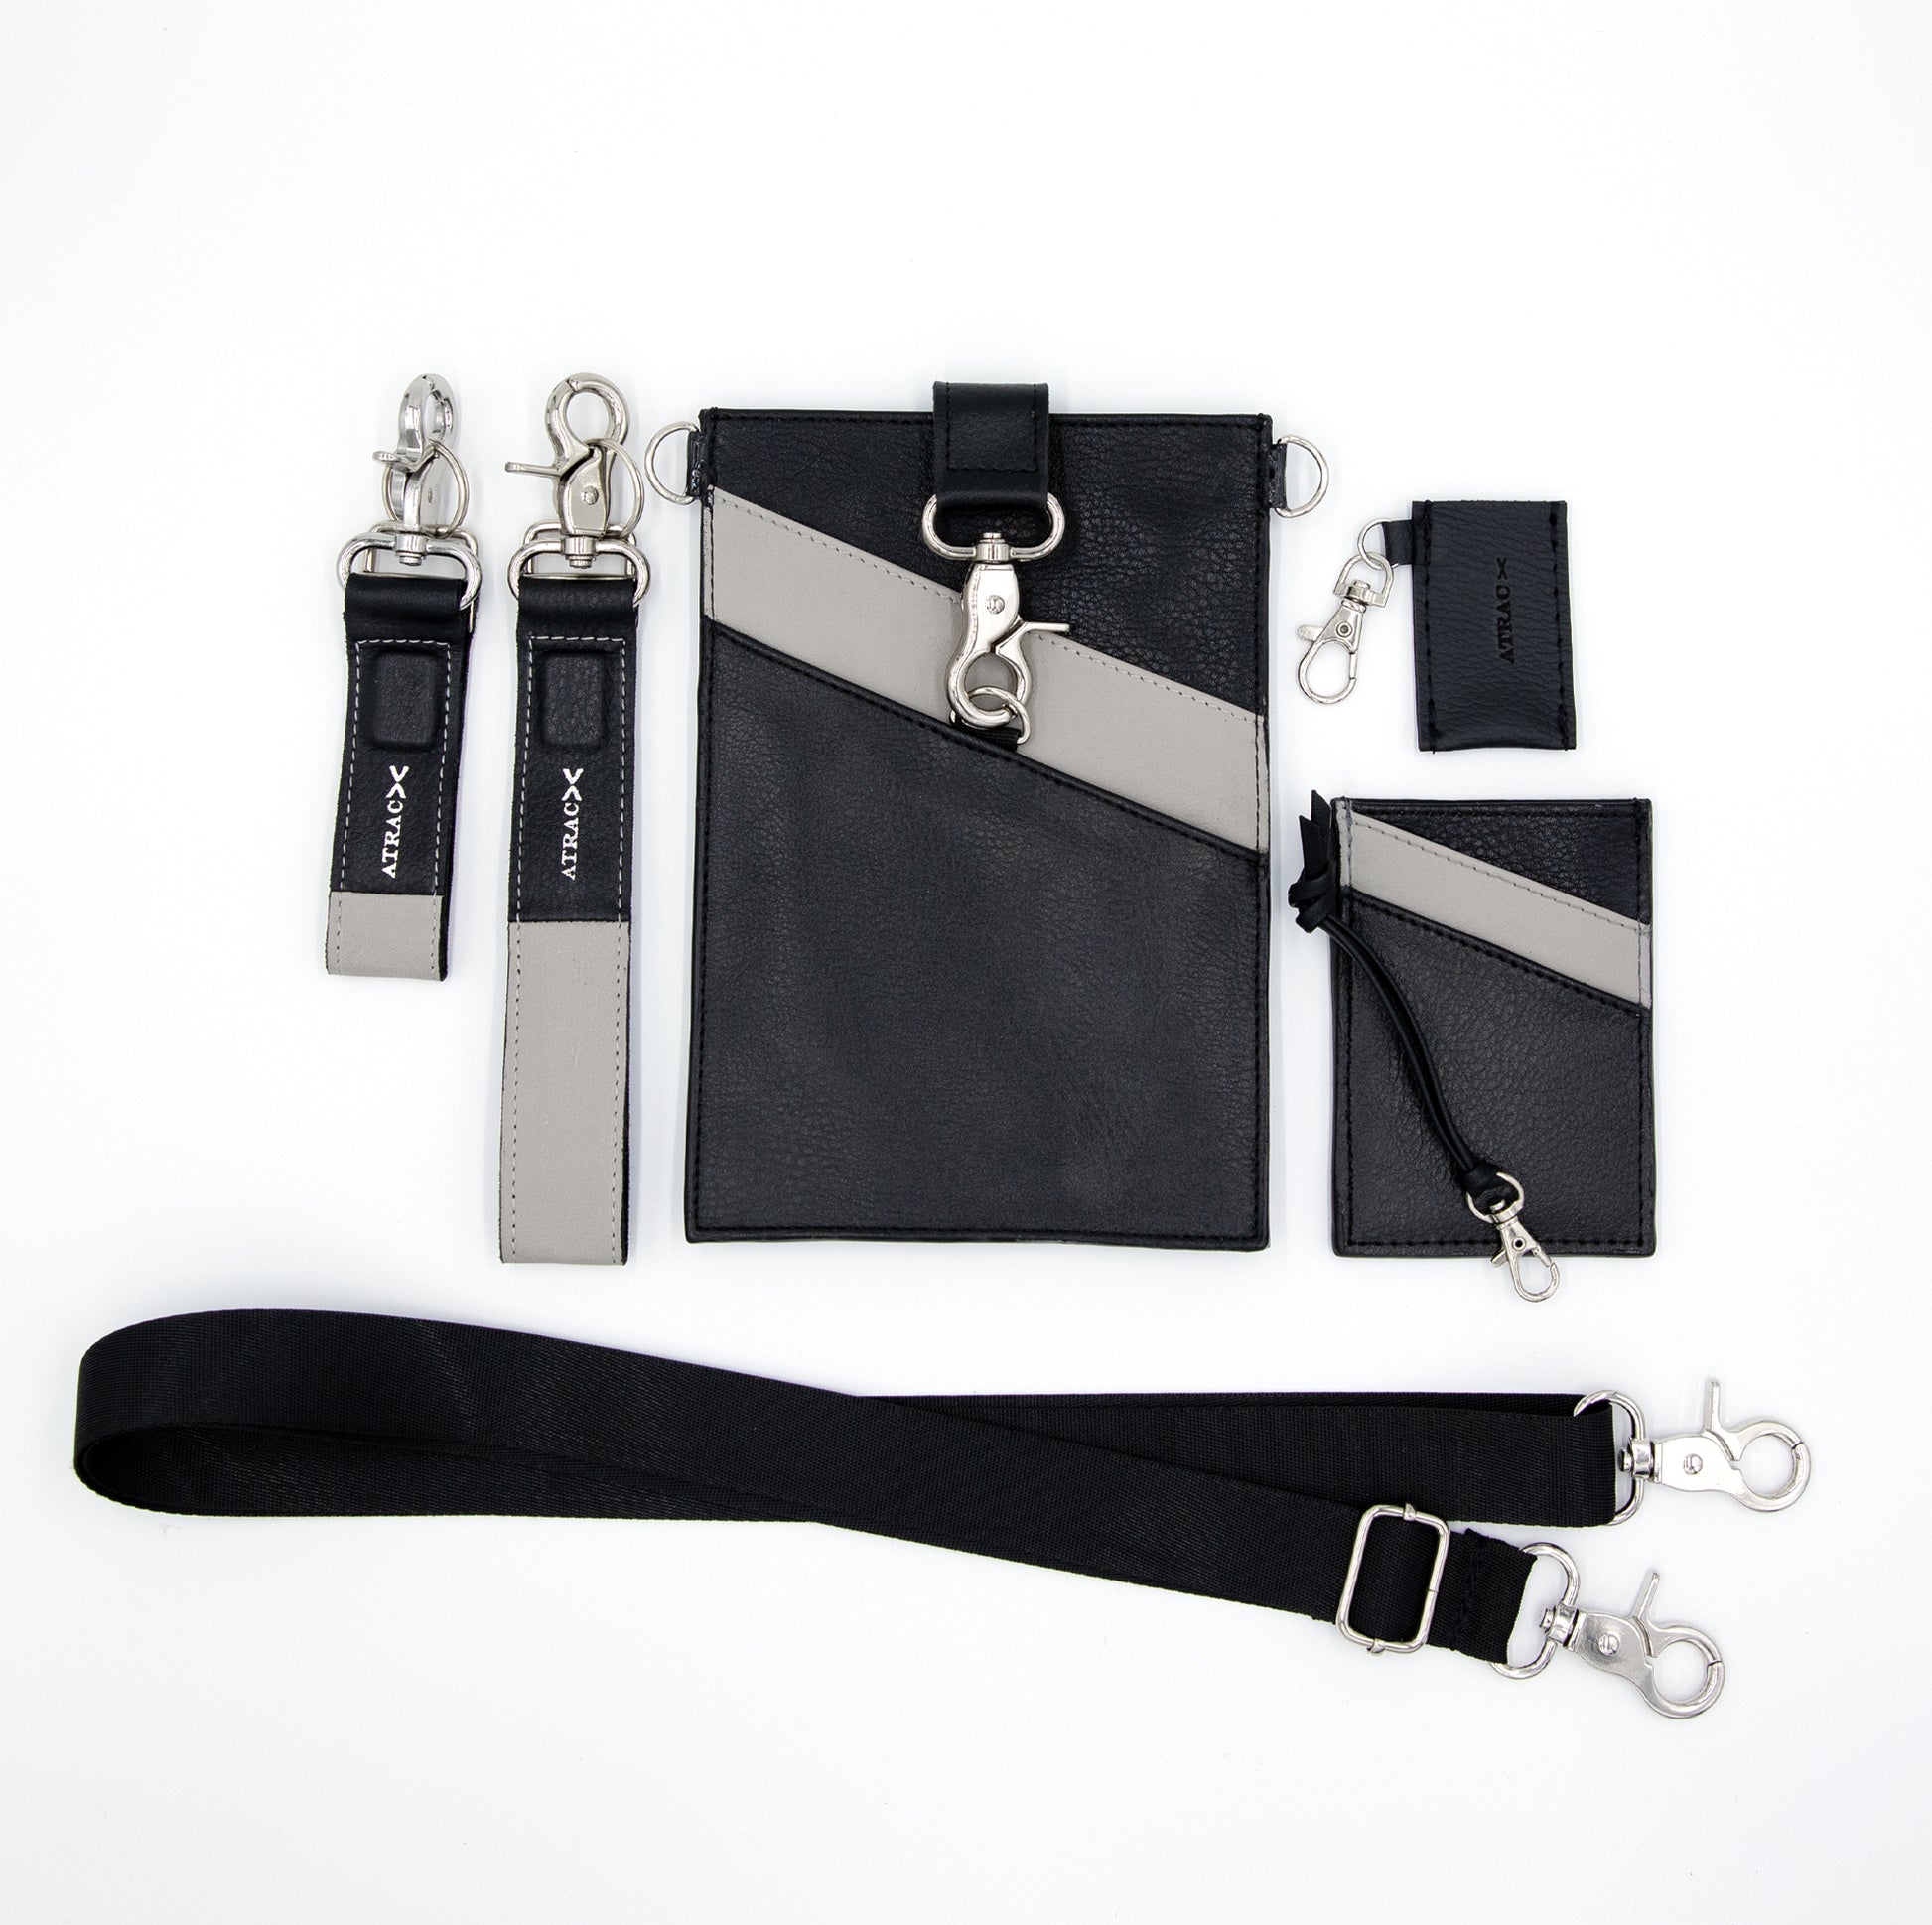 Bag Organizer-Compatible with Hermes-In the loop-18/23-HK made by